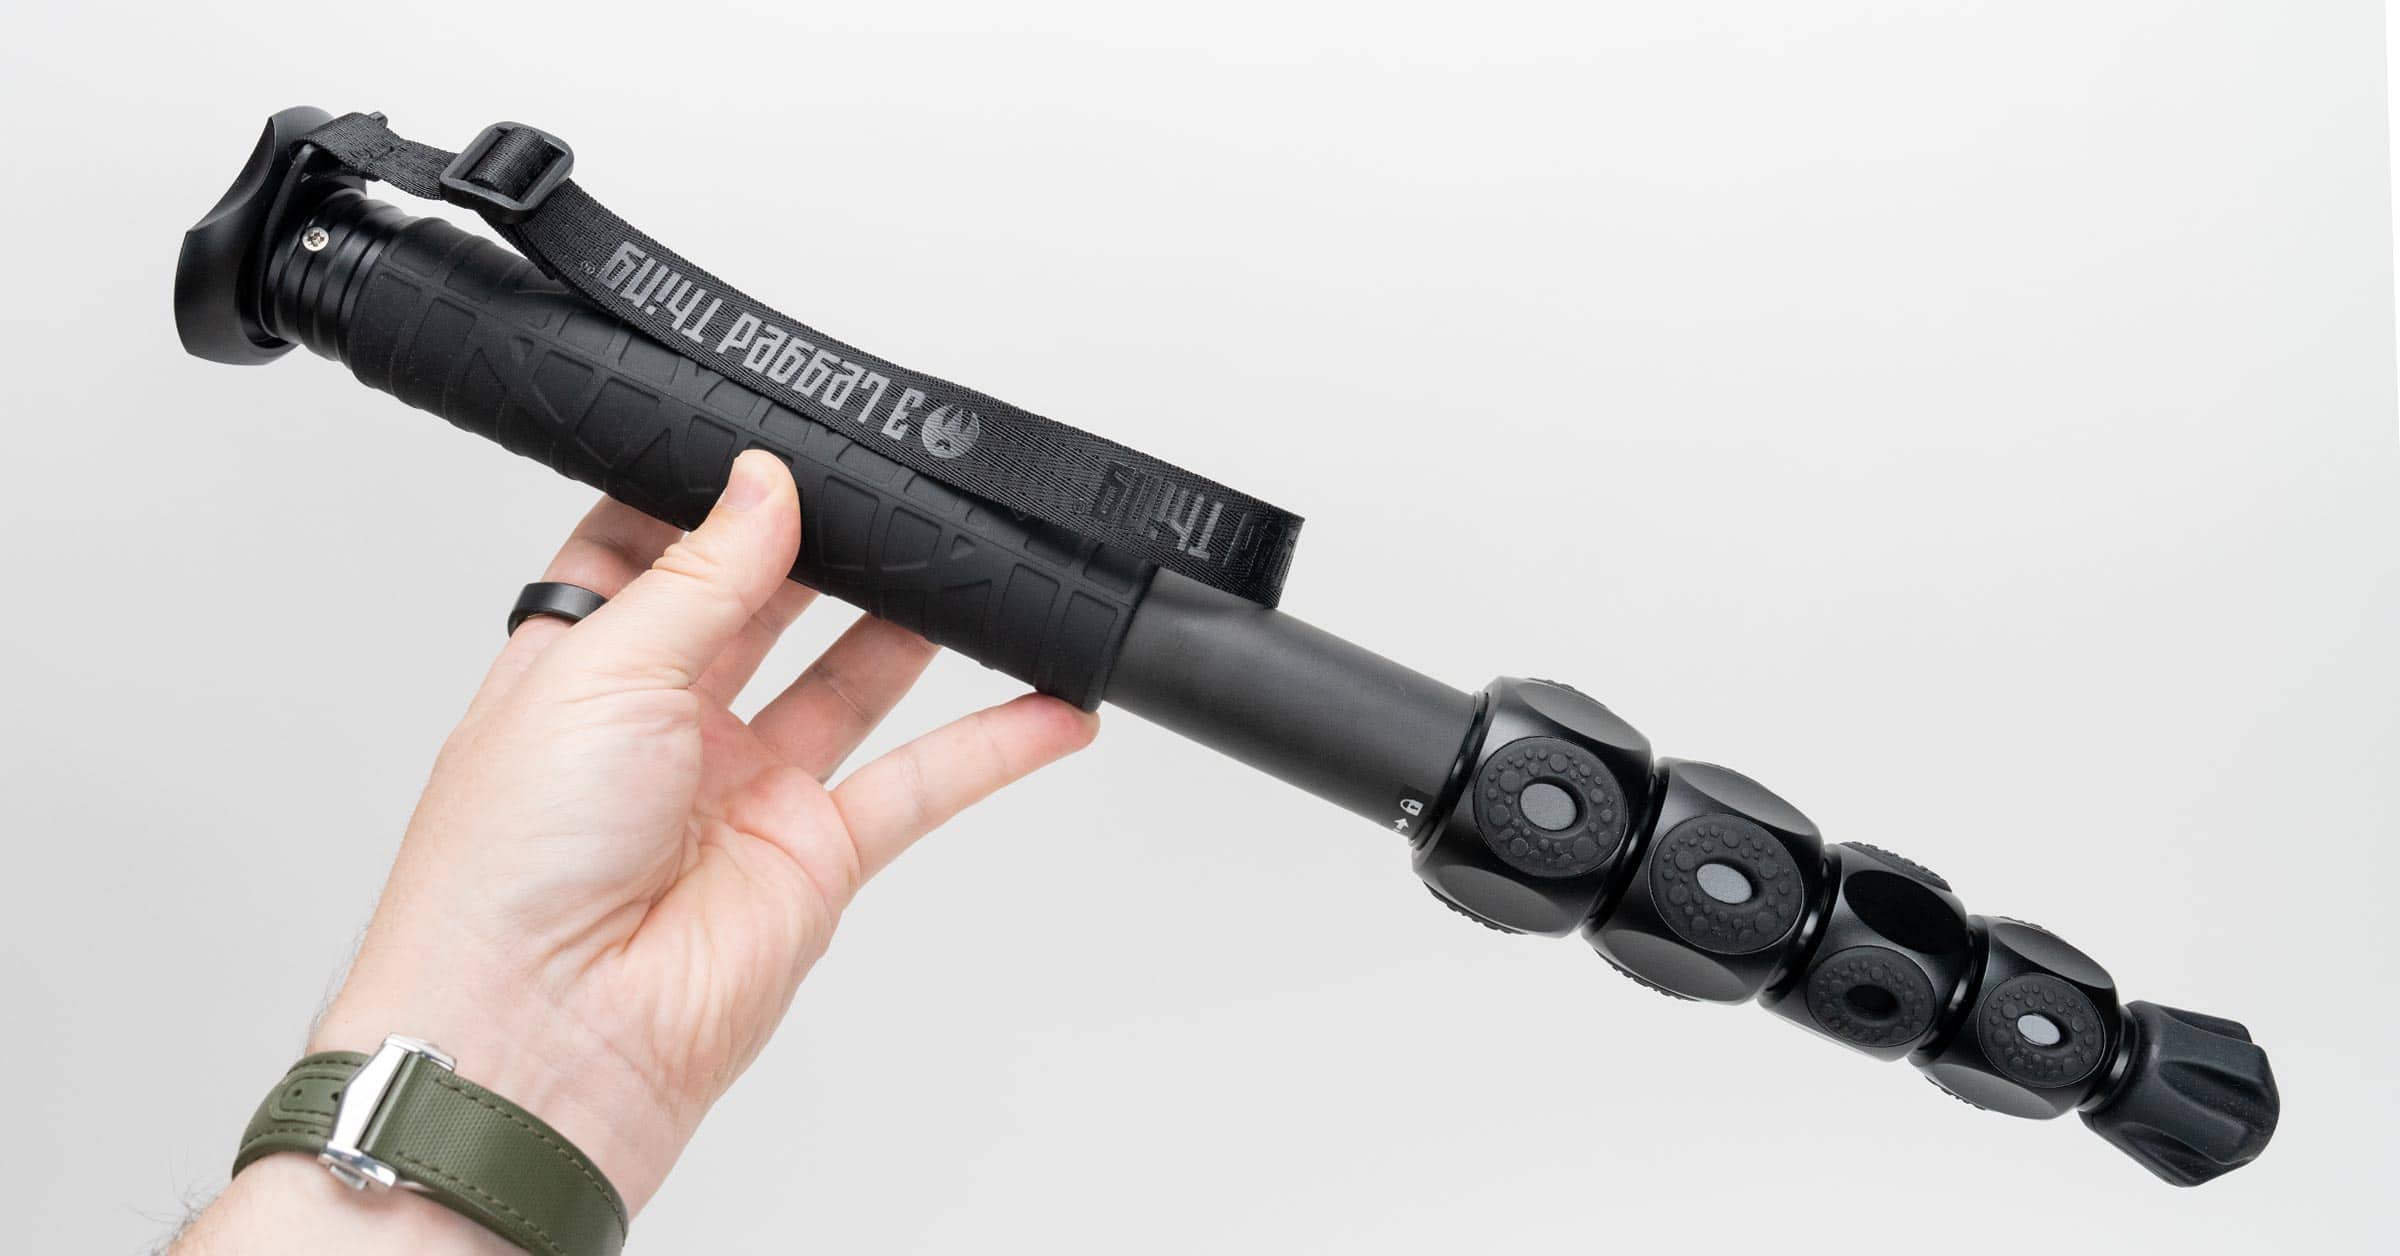 Monopod Review: The Perfect Accessory for Capturing Stunning Shots